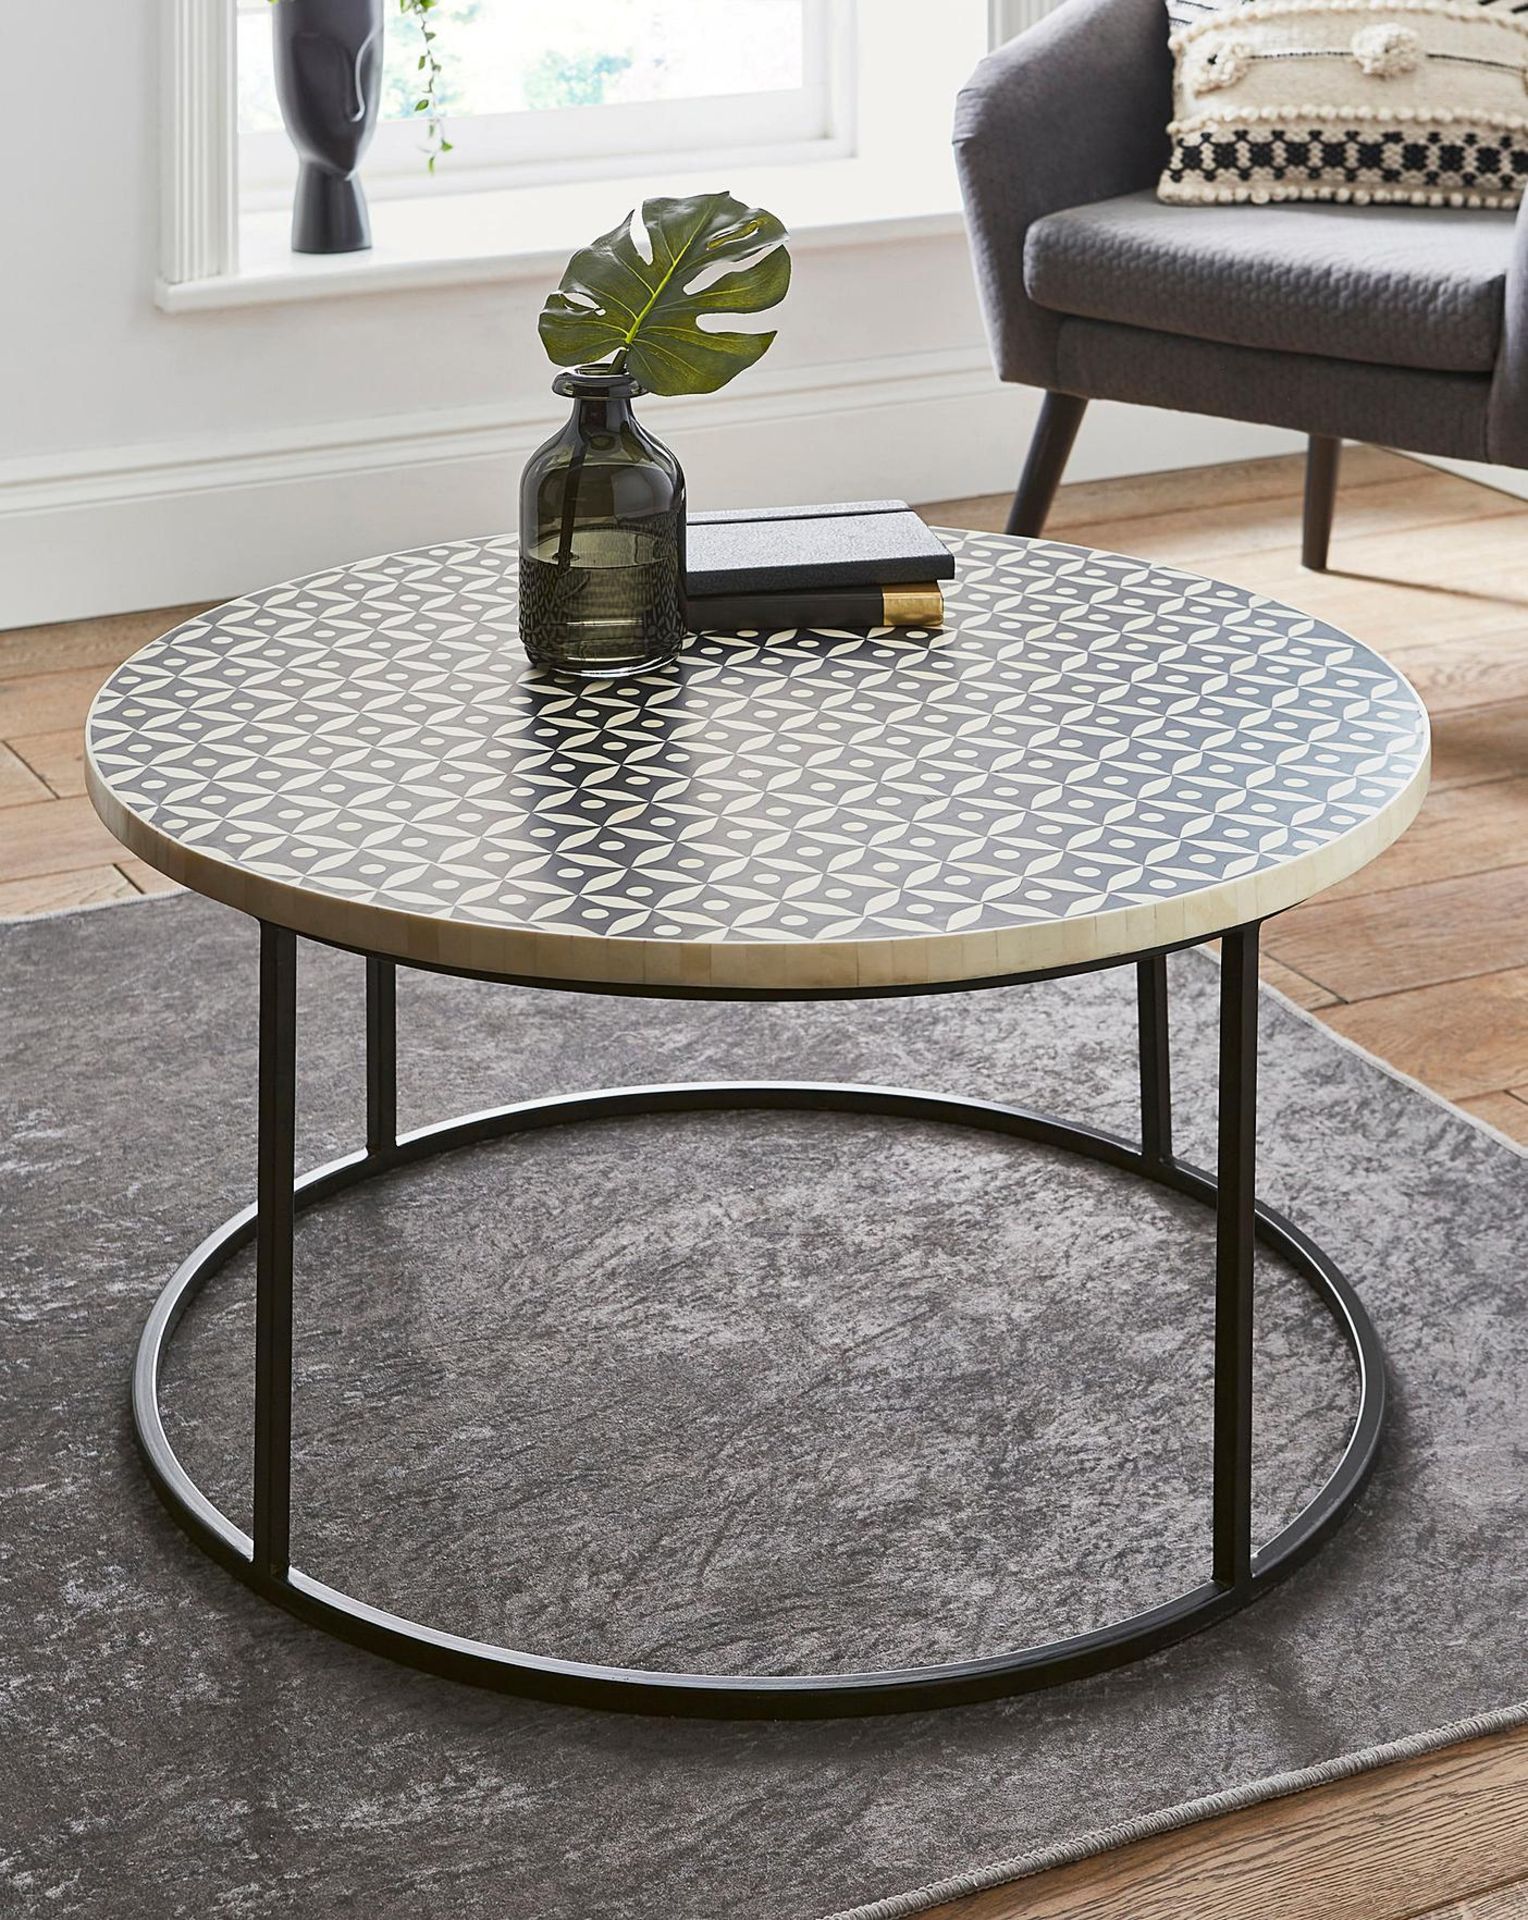 BRAND NEW AALIYAH LUXURY ROUND COFFEE TABLE R12-8